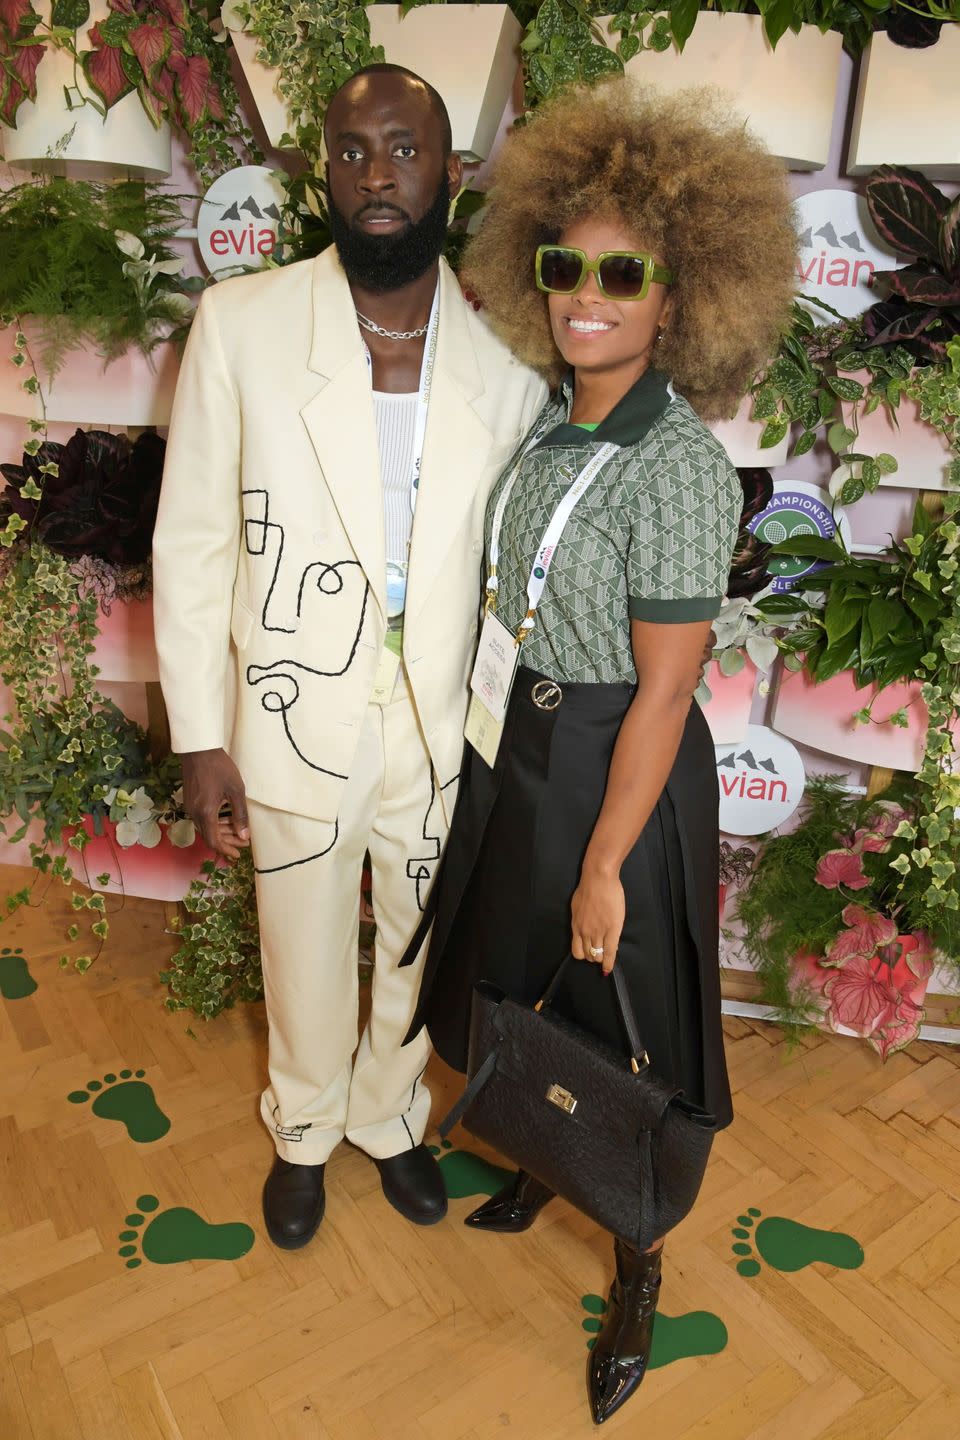 marcel badiane robin and fleur east in fashionable outfits in front of a grassy wall